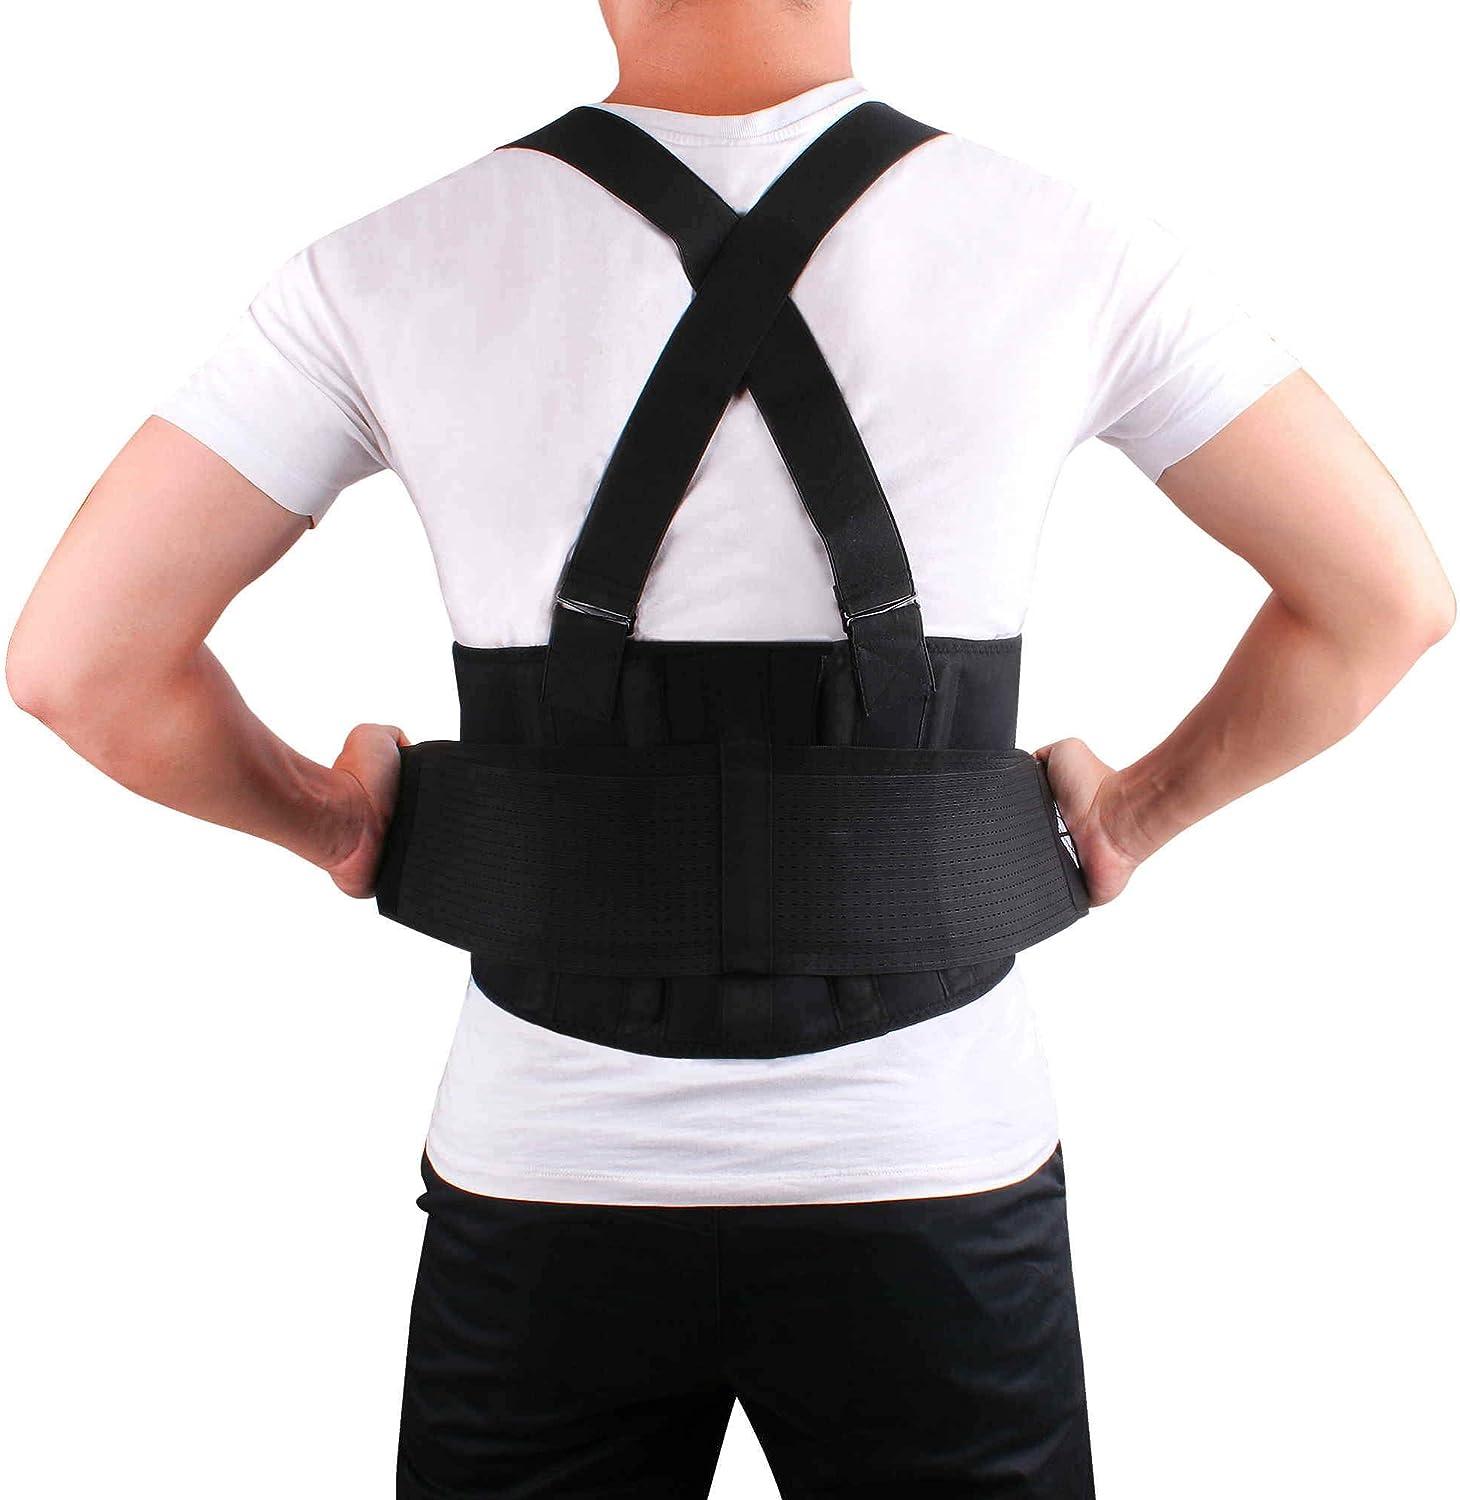 Lower Back Brace with Suspenders, Lumbar Support